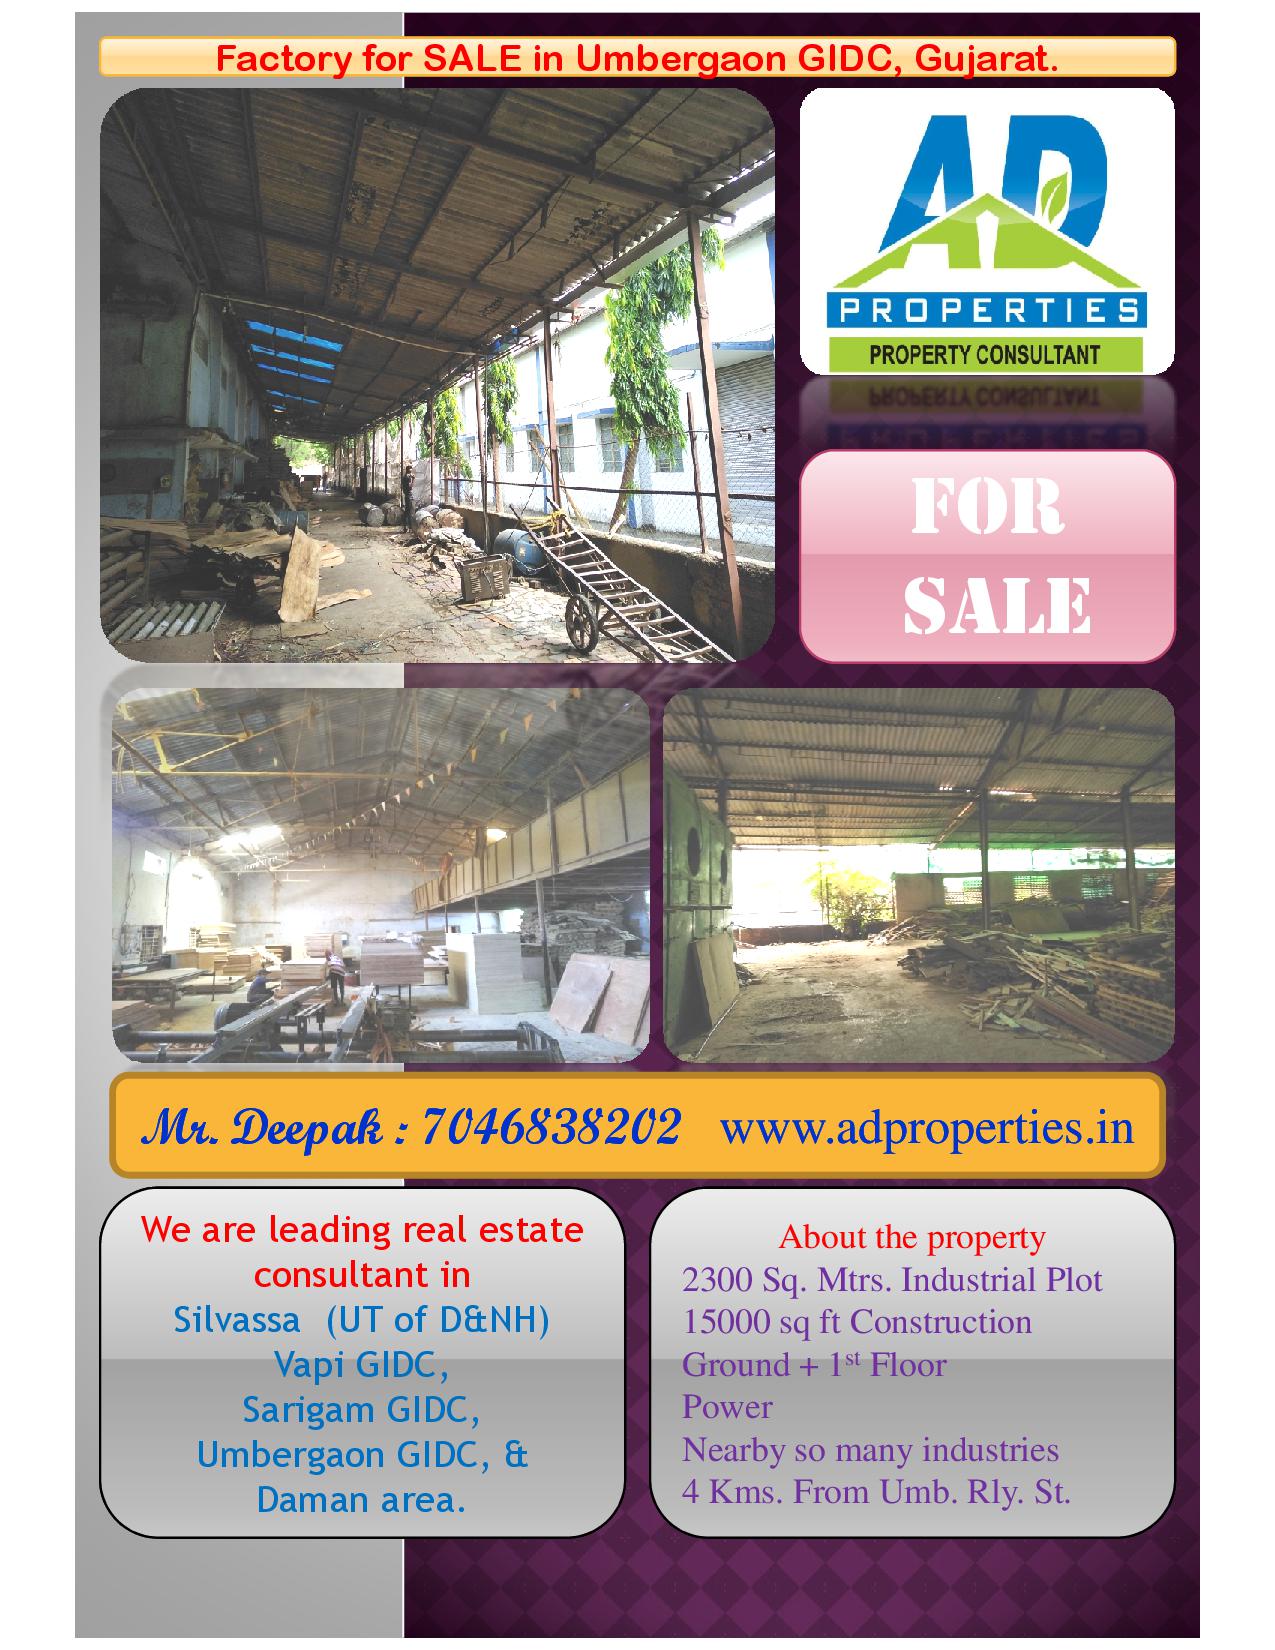 Factory for SALE at Umbergaon GIDC